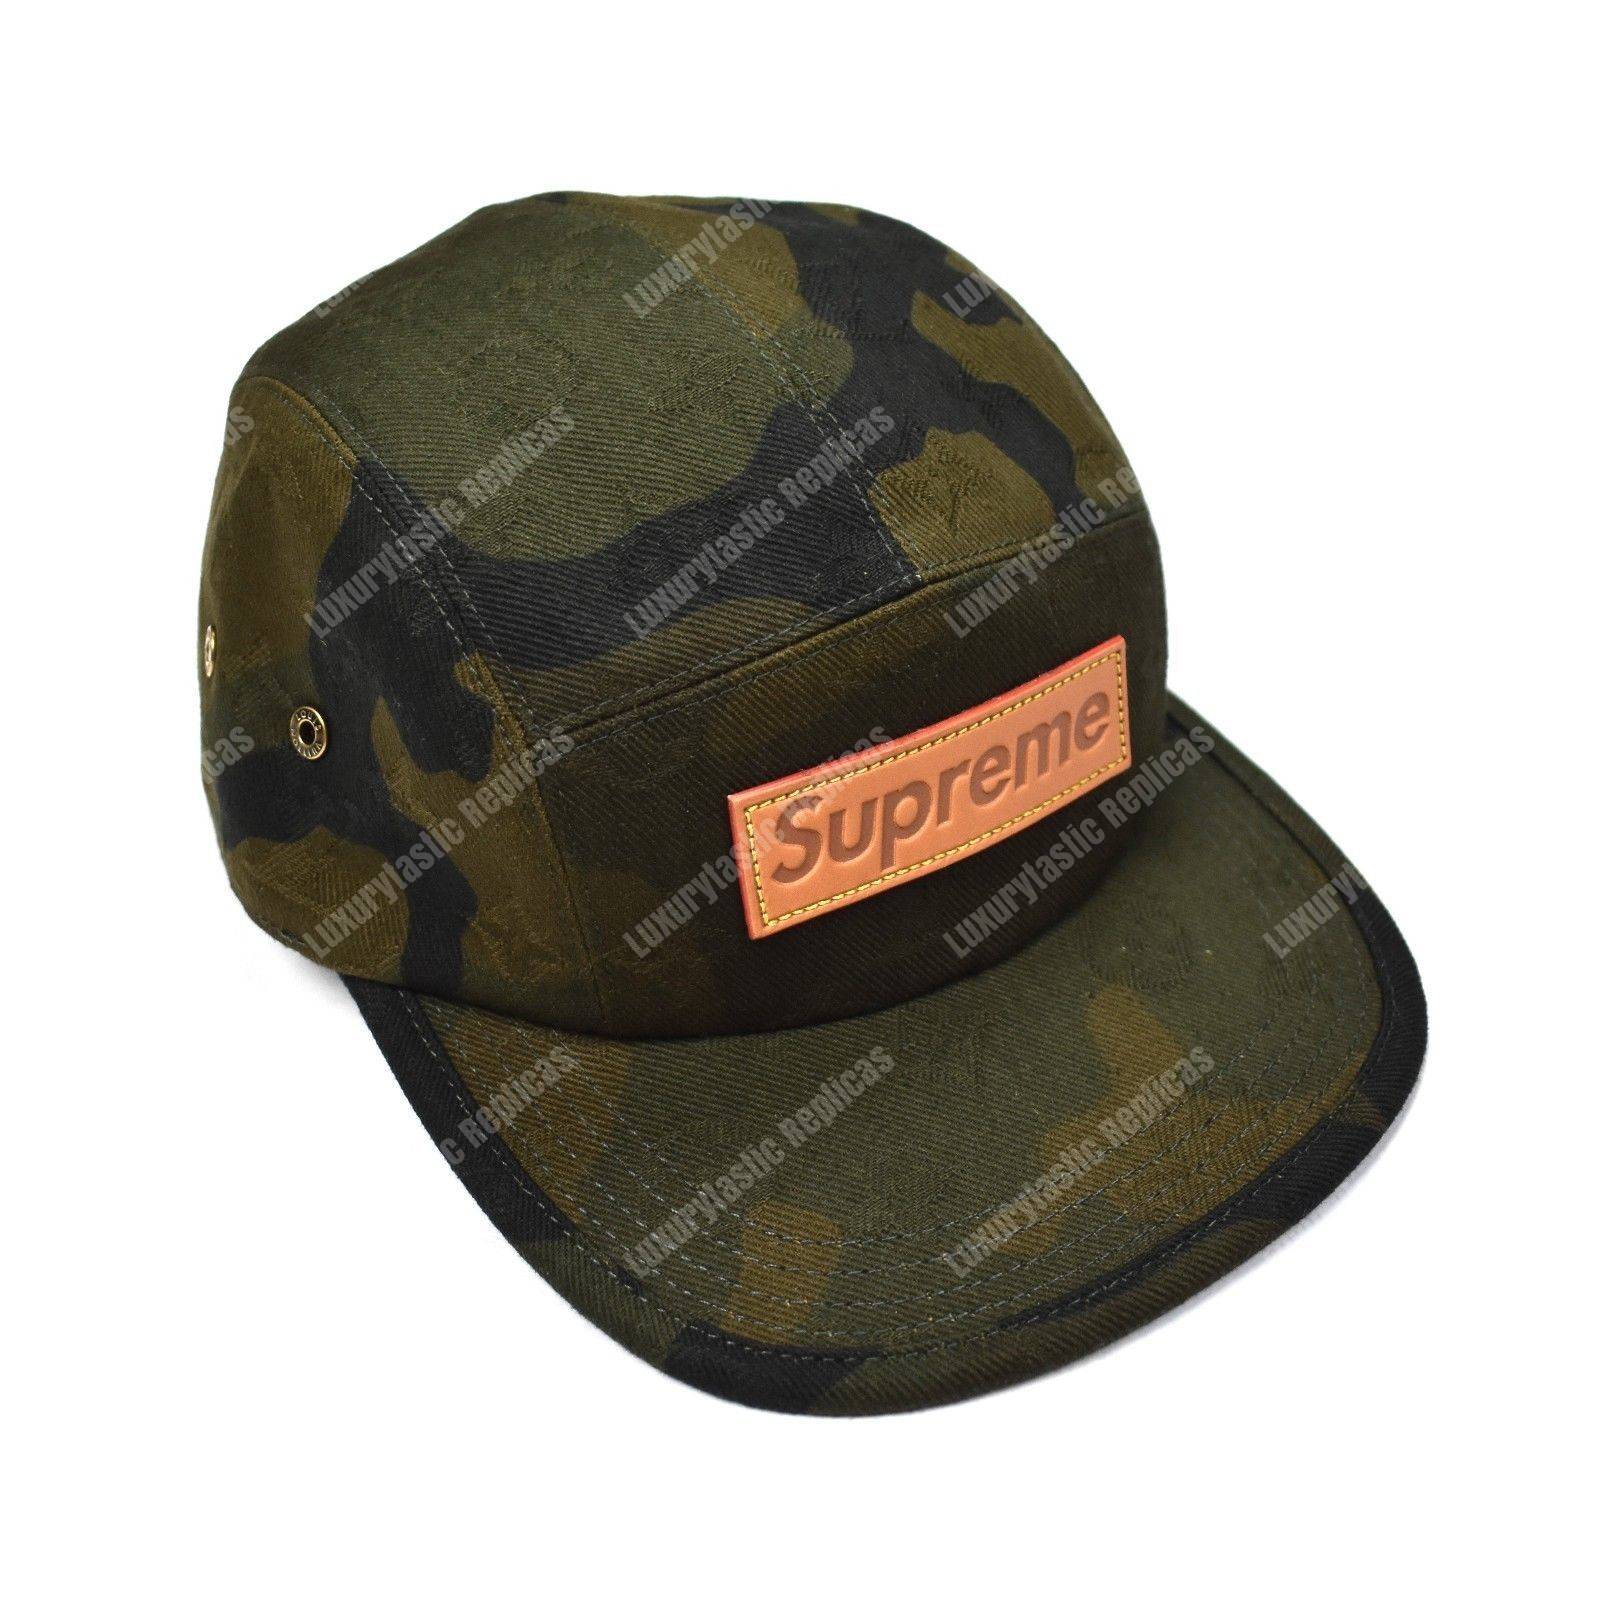 Vuitton x Supreme Camouflage Limited Edition 5 Cap Hat - Bags Valley